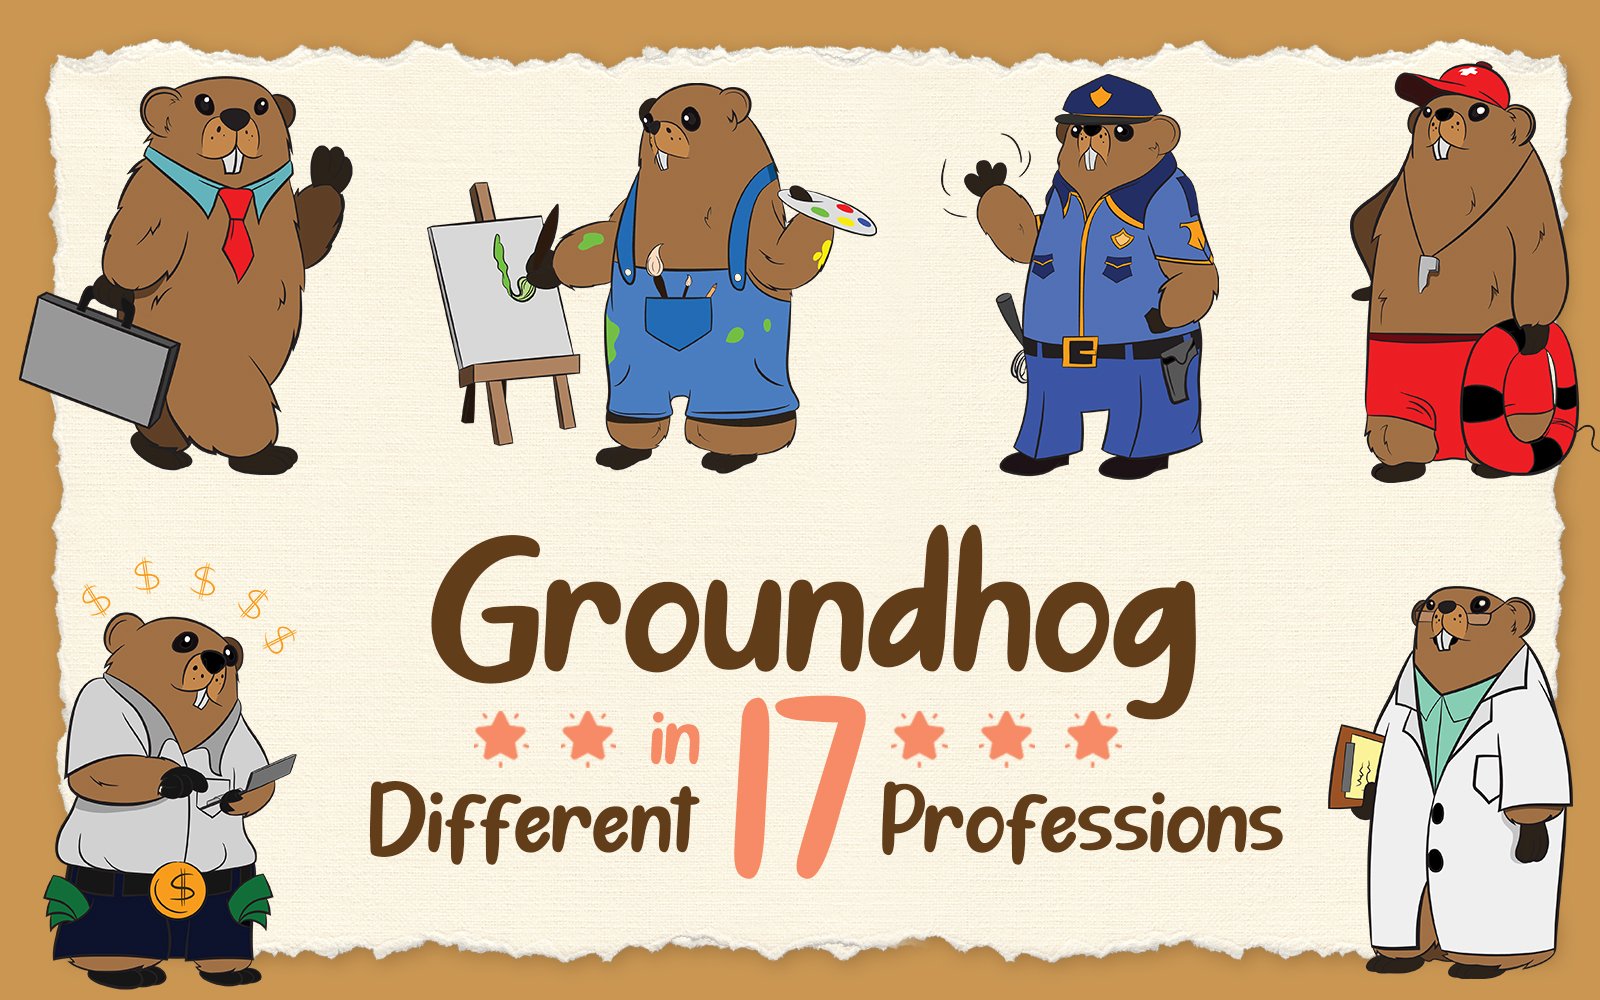 Groundhog Character in 17 Different Professions for Groundhog Day - Illustration